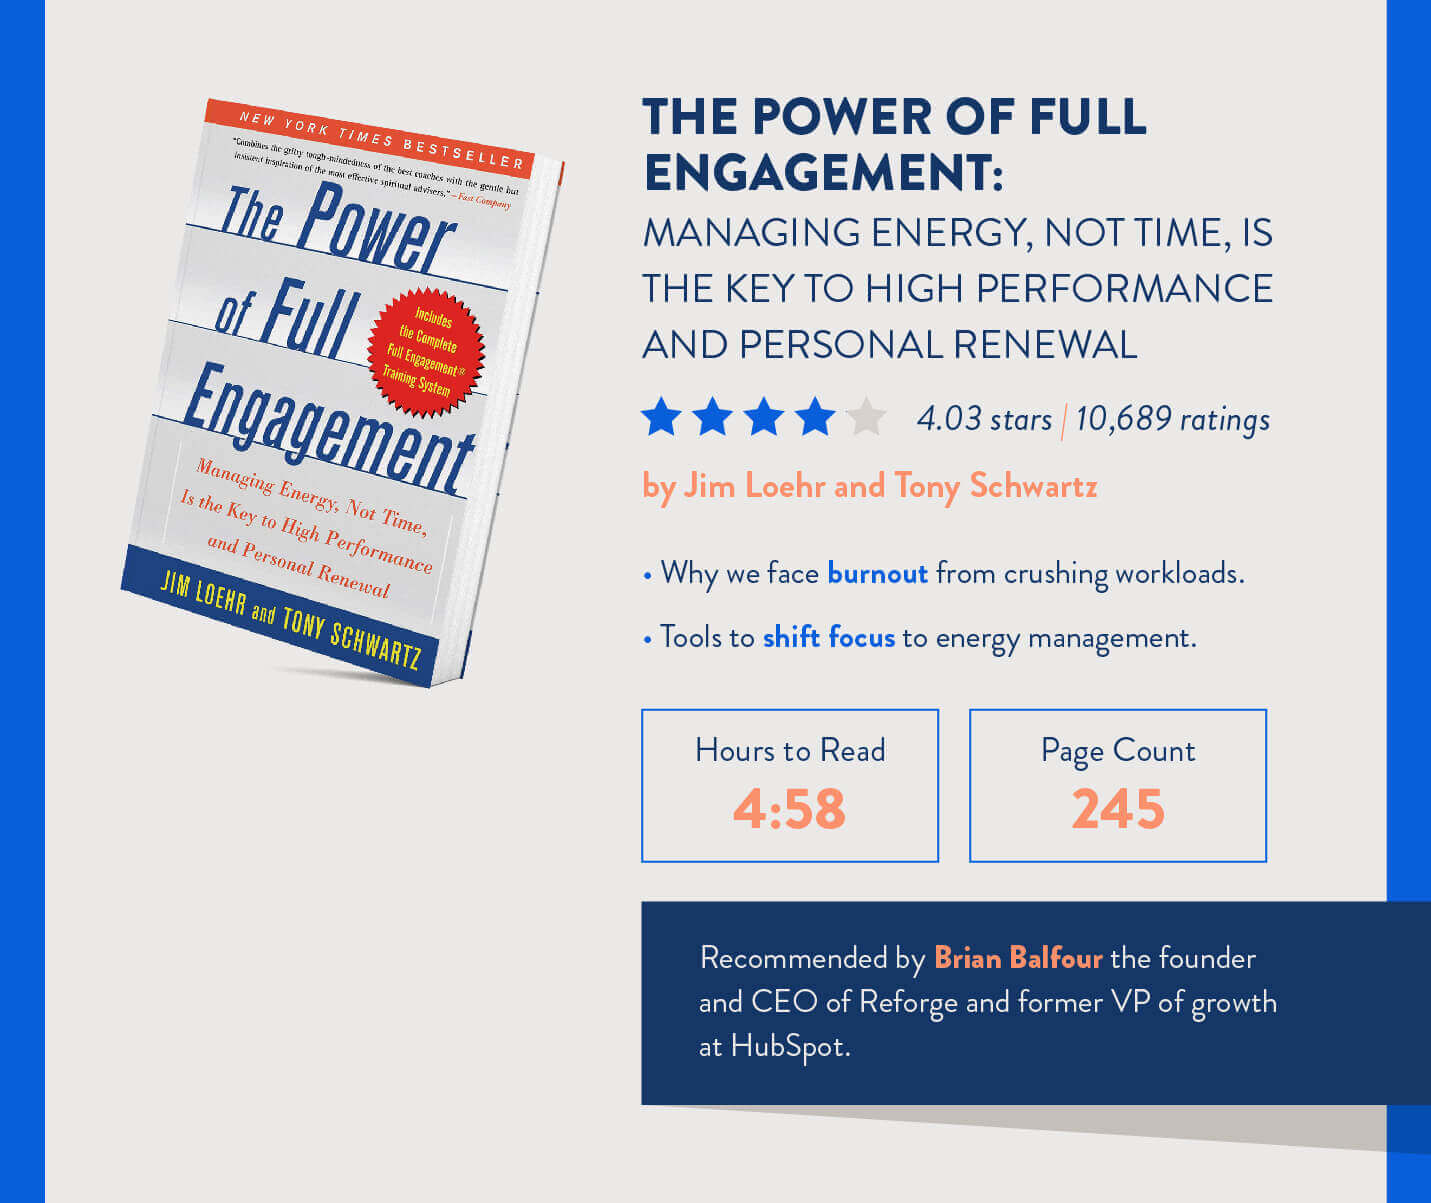 power of full engagement energy regulation book for mobile marketers with how long it takes to read and topics for discussion